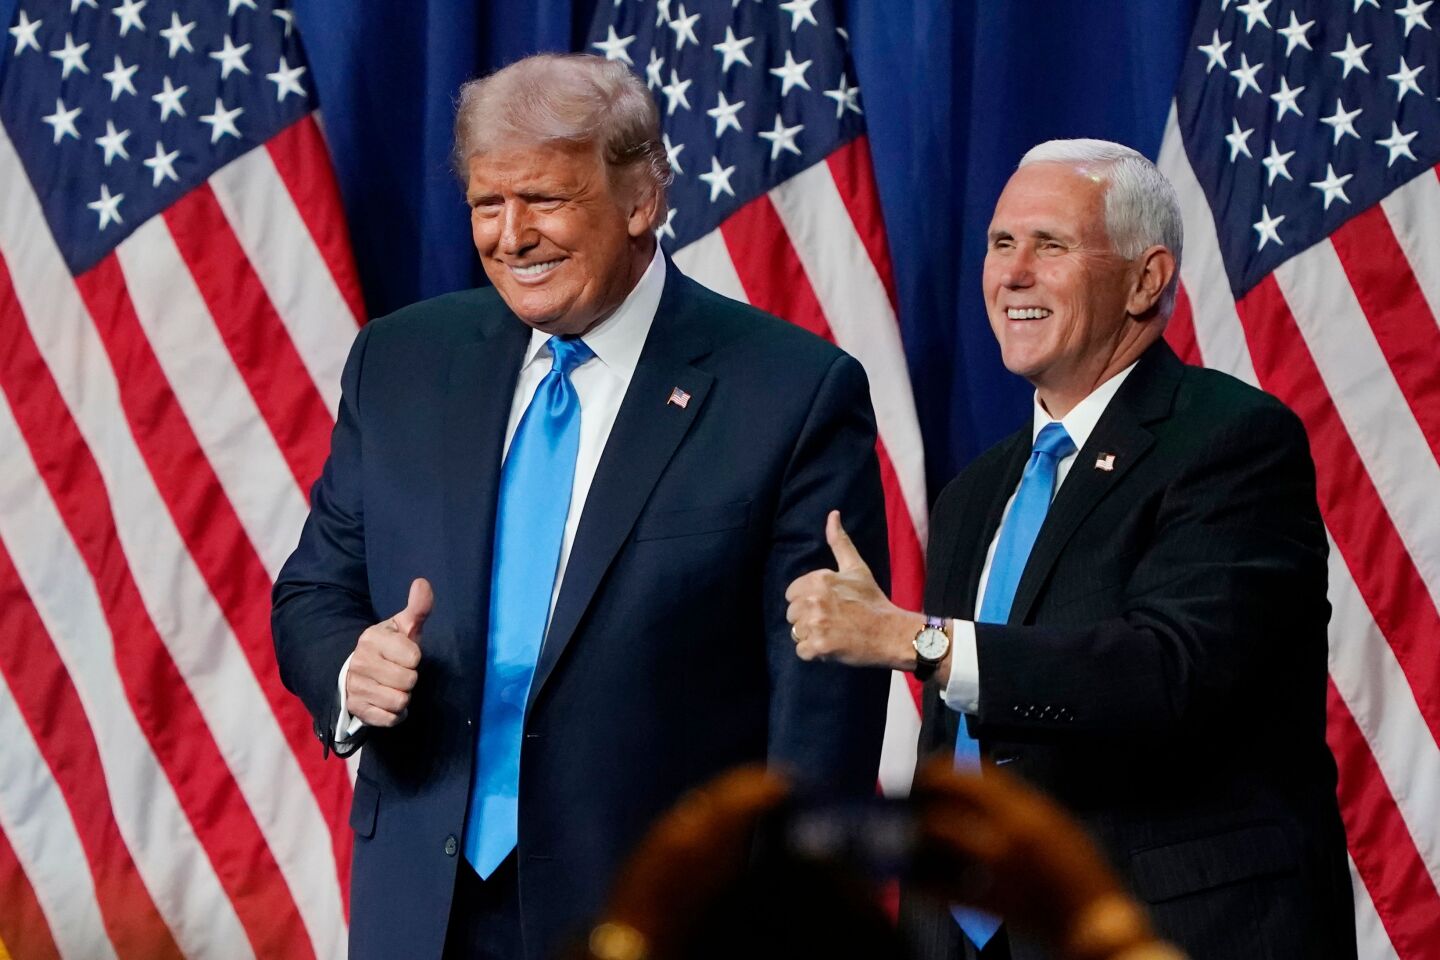 President Trump and Vice President Mike Pence on the first day of the Republican National Convention.